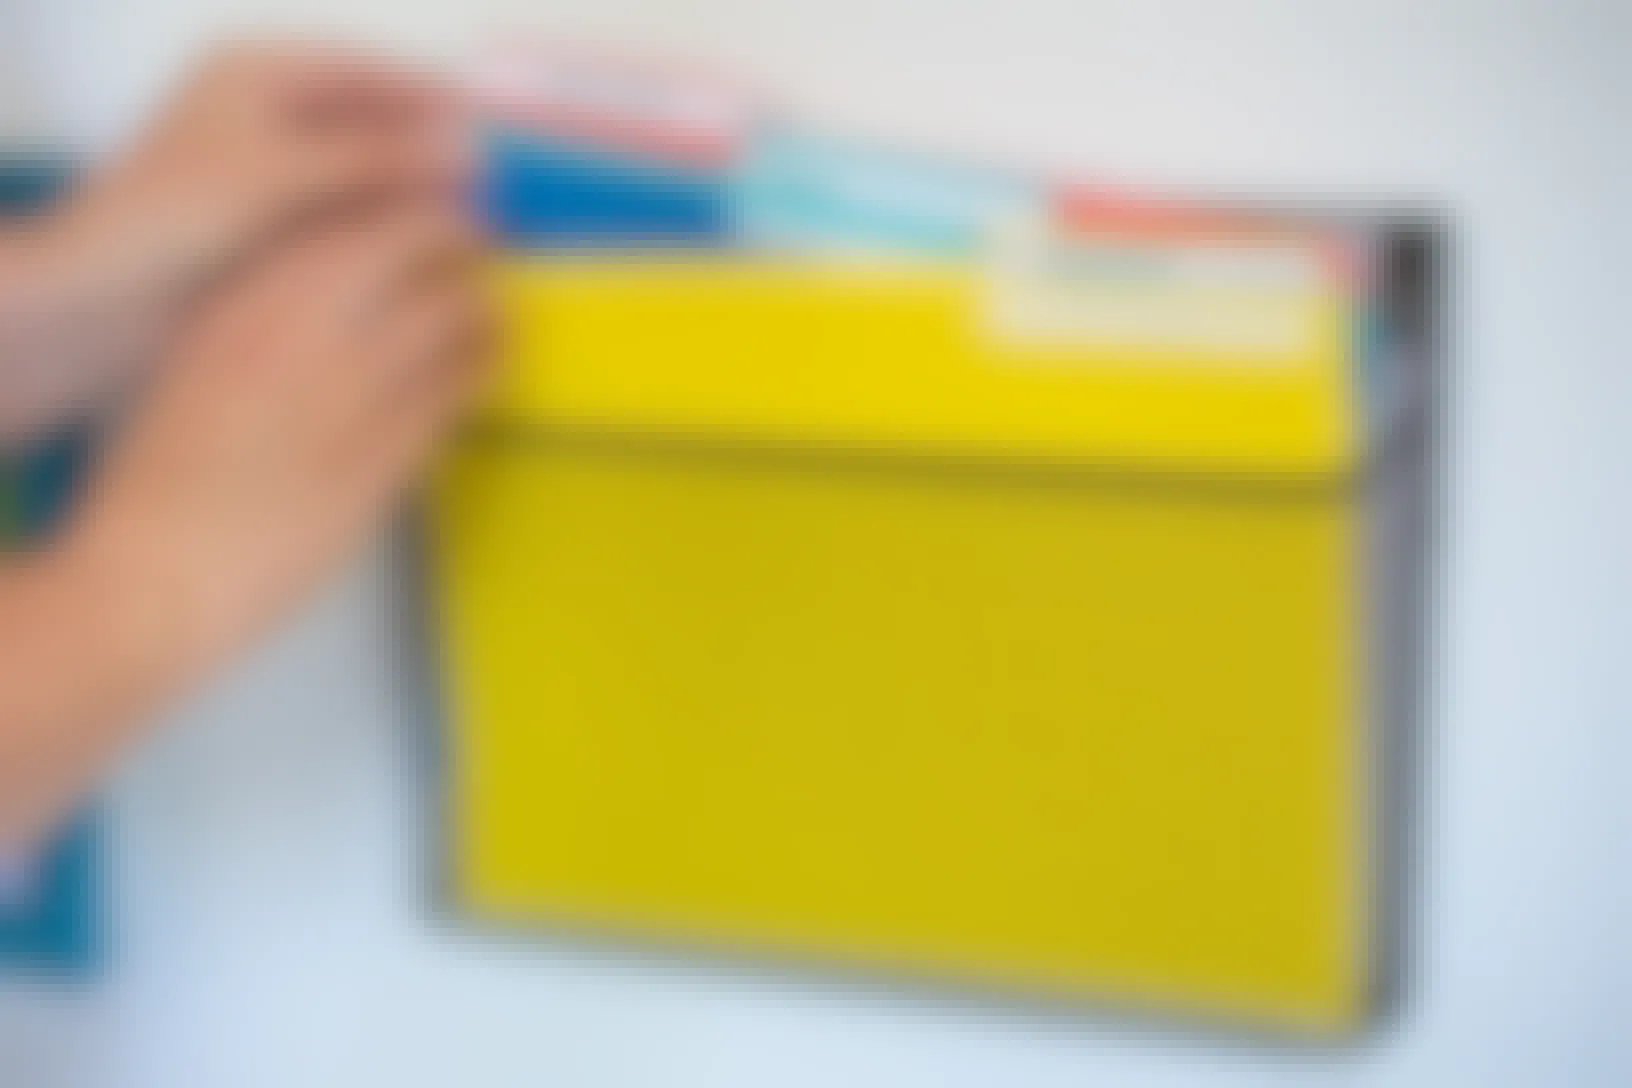 A wall file organizer with bright colored folders and someone reaching to take a blue file.